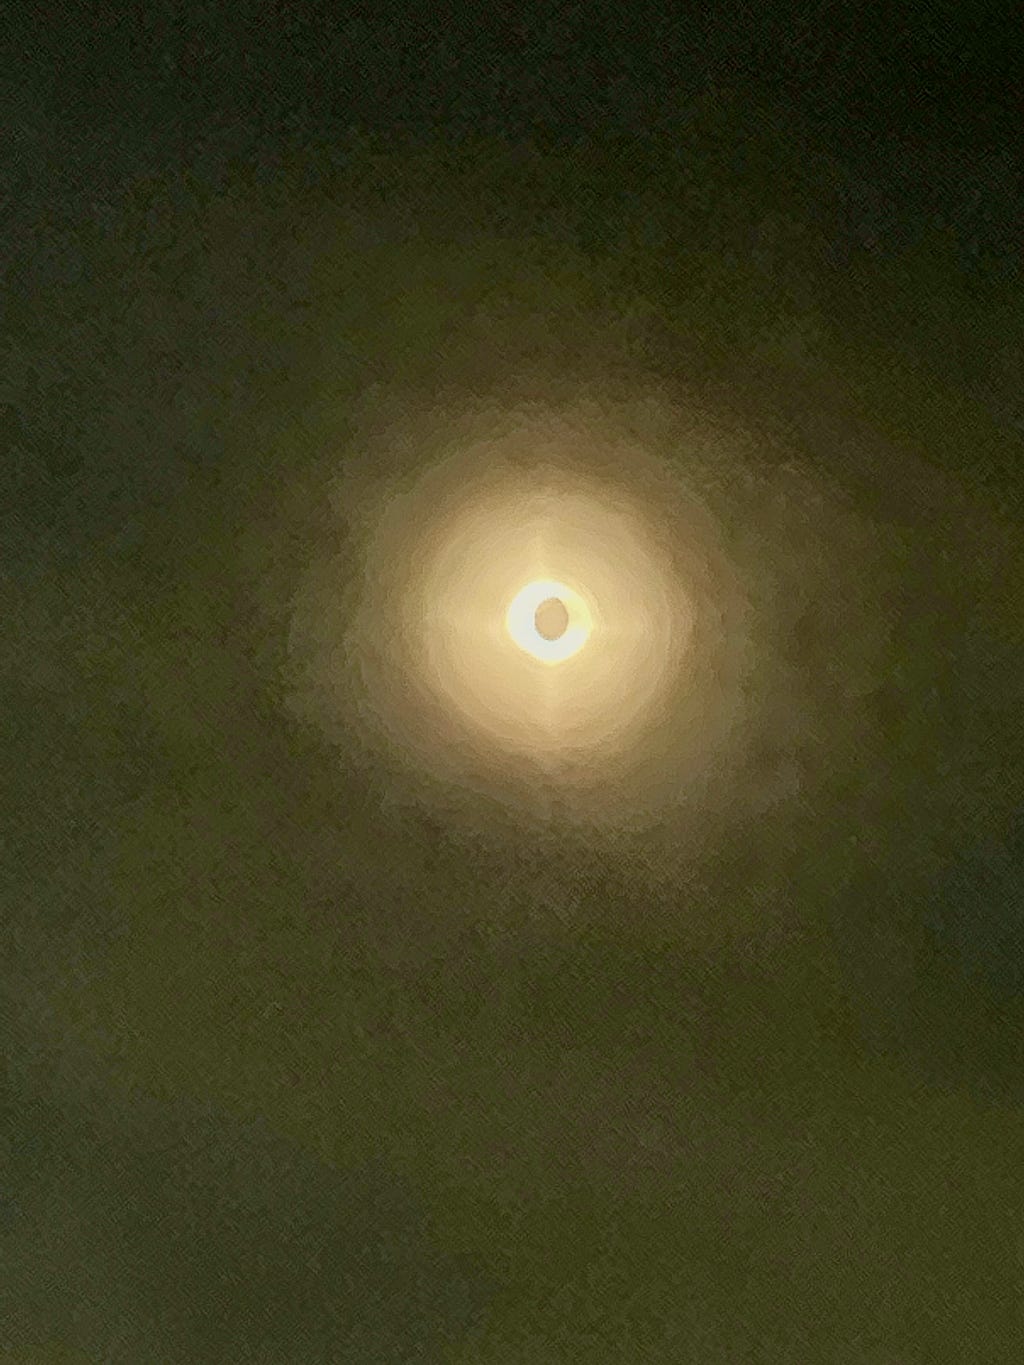 A photograph of the solar eclipse simultaneously showing the dusk and dawn as the moon is perfectly centered in front of the sun.